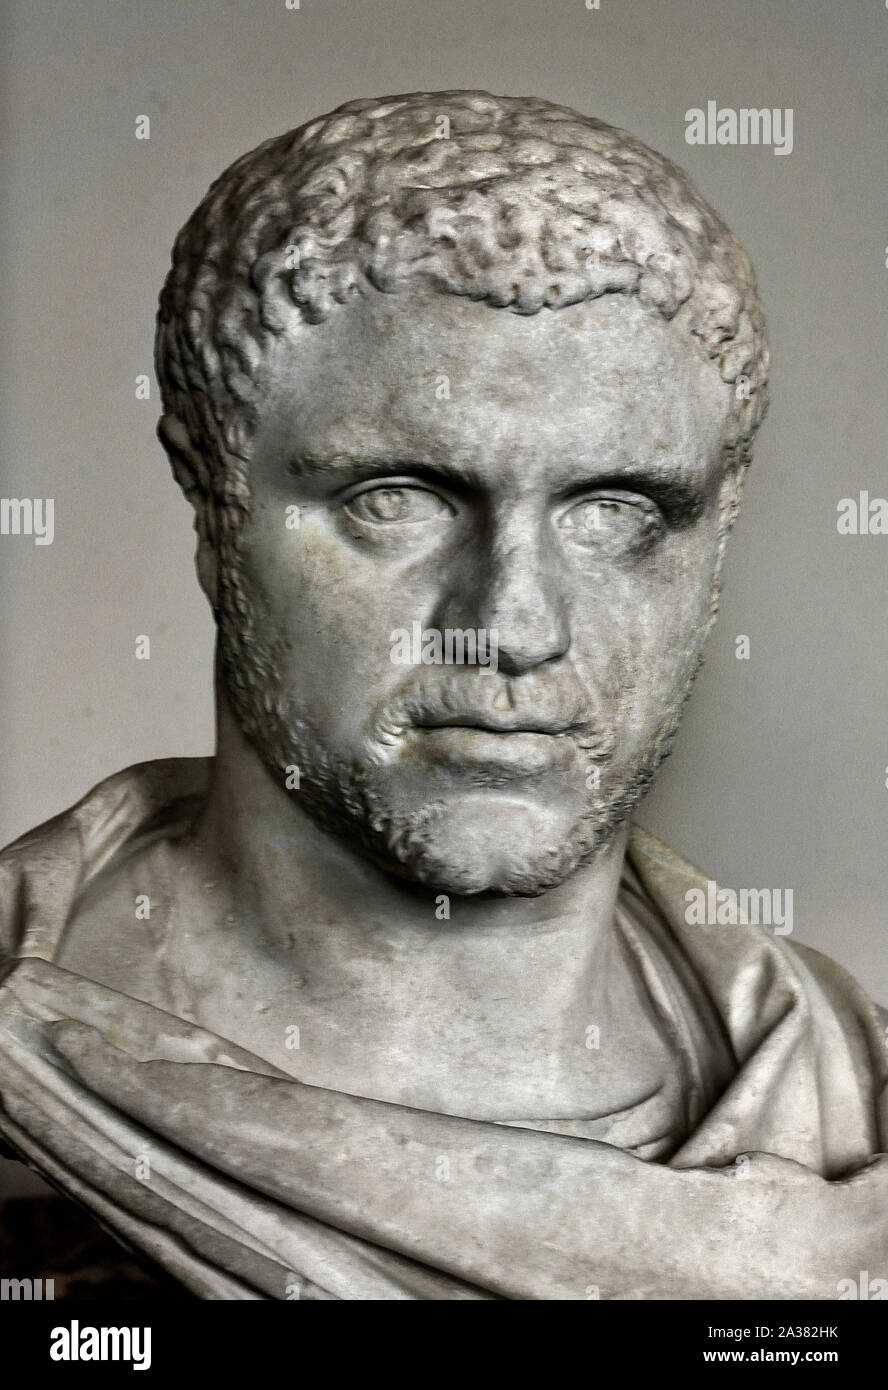 The Emperor Caracalla.  Emperor from 211 - 217 AD Marble H. 52 cm. (This portrait of the type called 'Tivoli') Rome, Roman, Italy. Stock Photo